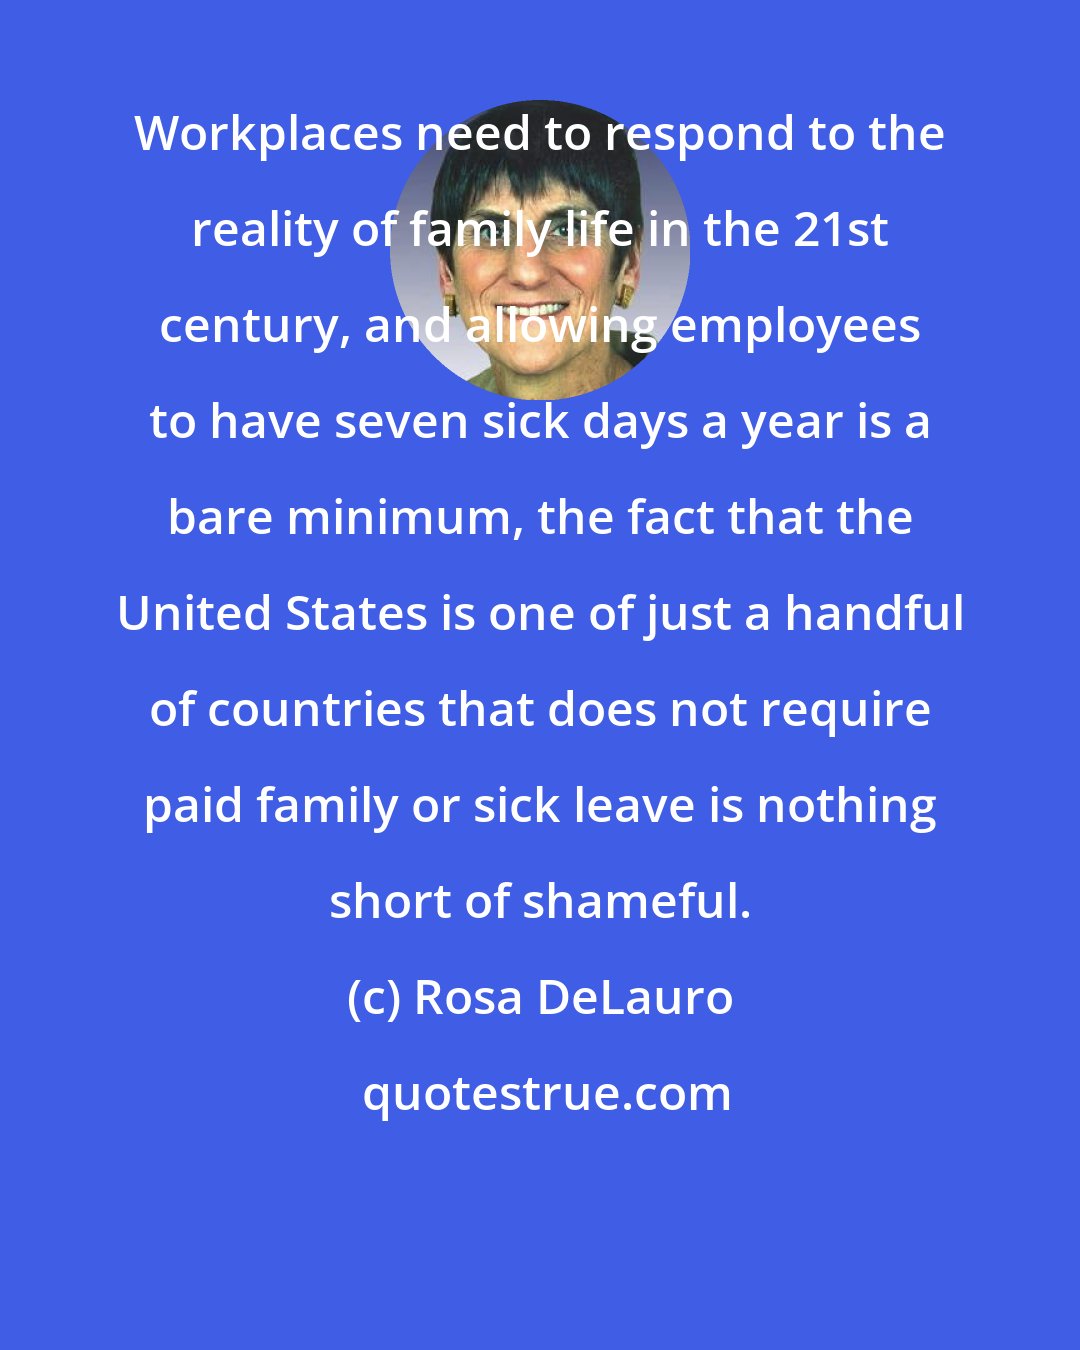 Rosa DeLauro: Workplaces need to respond to the reality of family life in the 21st century, and allowing employees to have seven sick days a year is a bare minimum, the fact that the United States is one of just a handful of countries that does not require paid family or sick leave is nothing short of shameful.